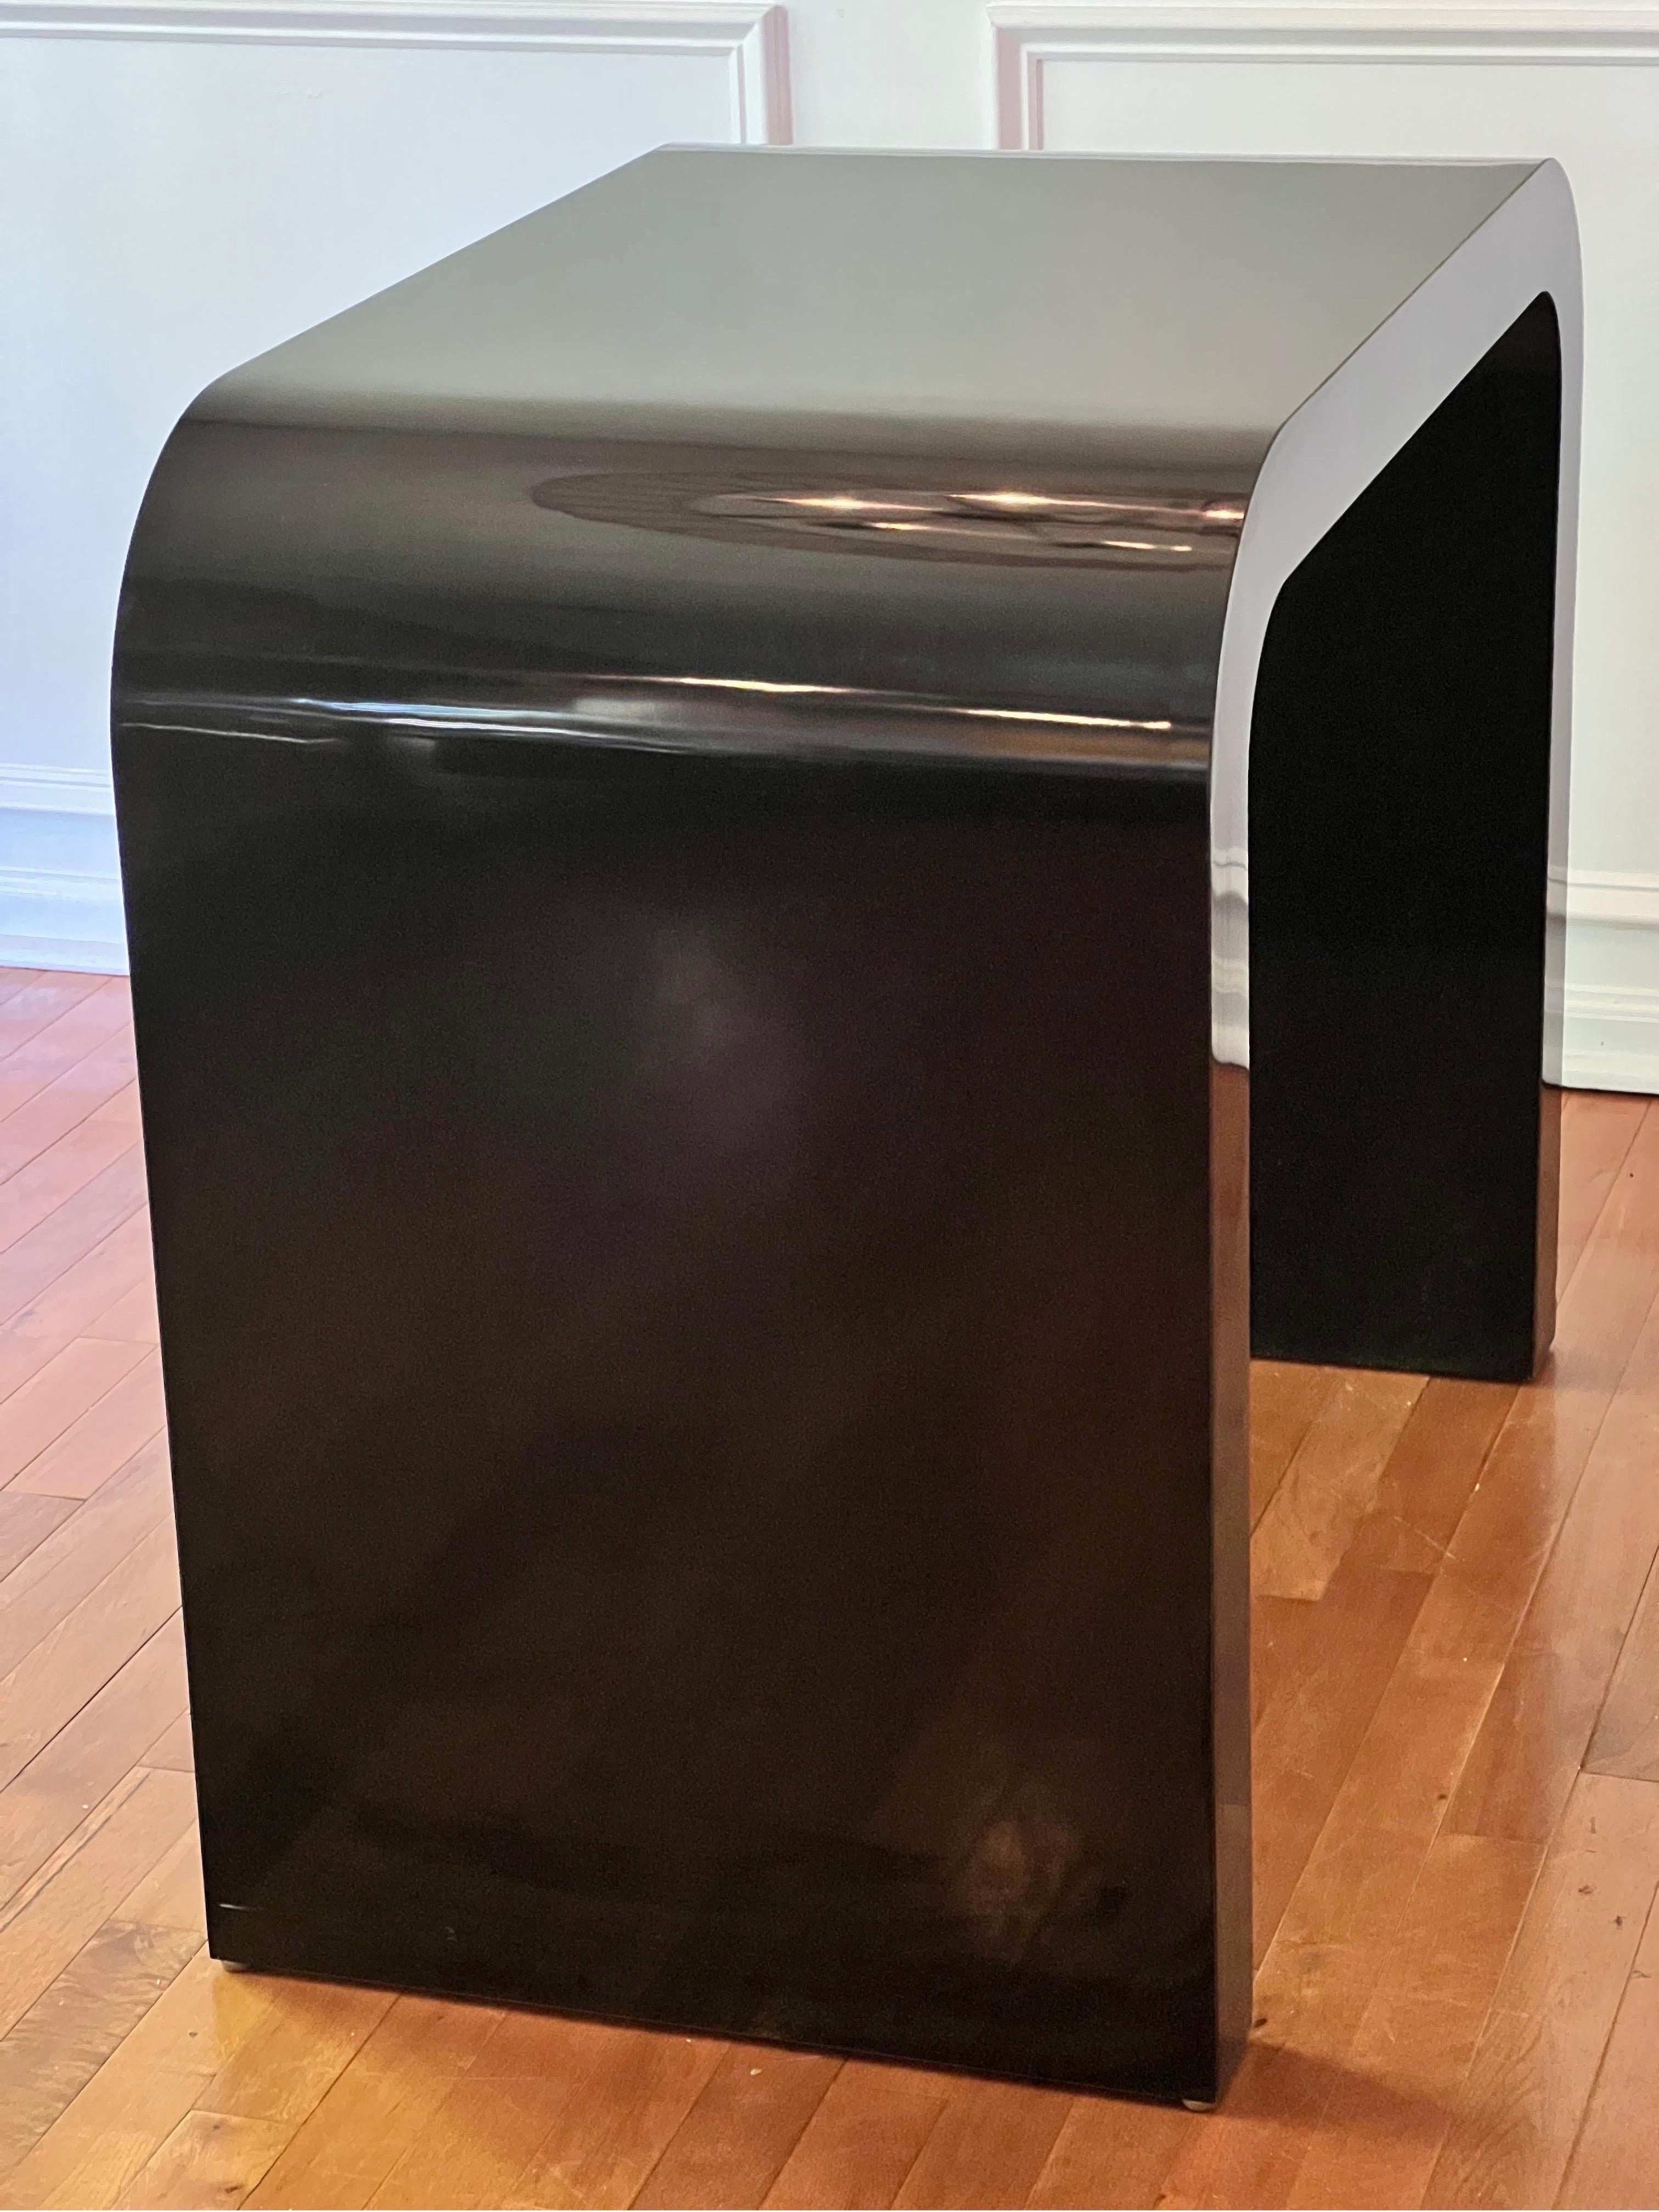 Stunning post-modern custom jet black lacquered waterfall console table. 

Boasting a sleek and seamless design, this table is three inches thick all around. The glossy jet black is fabulous and makes a statement while the table size offers great